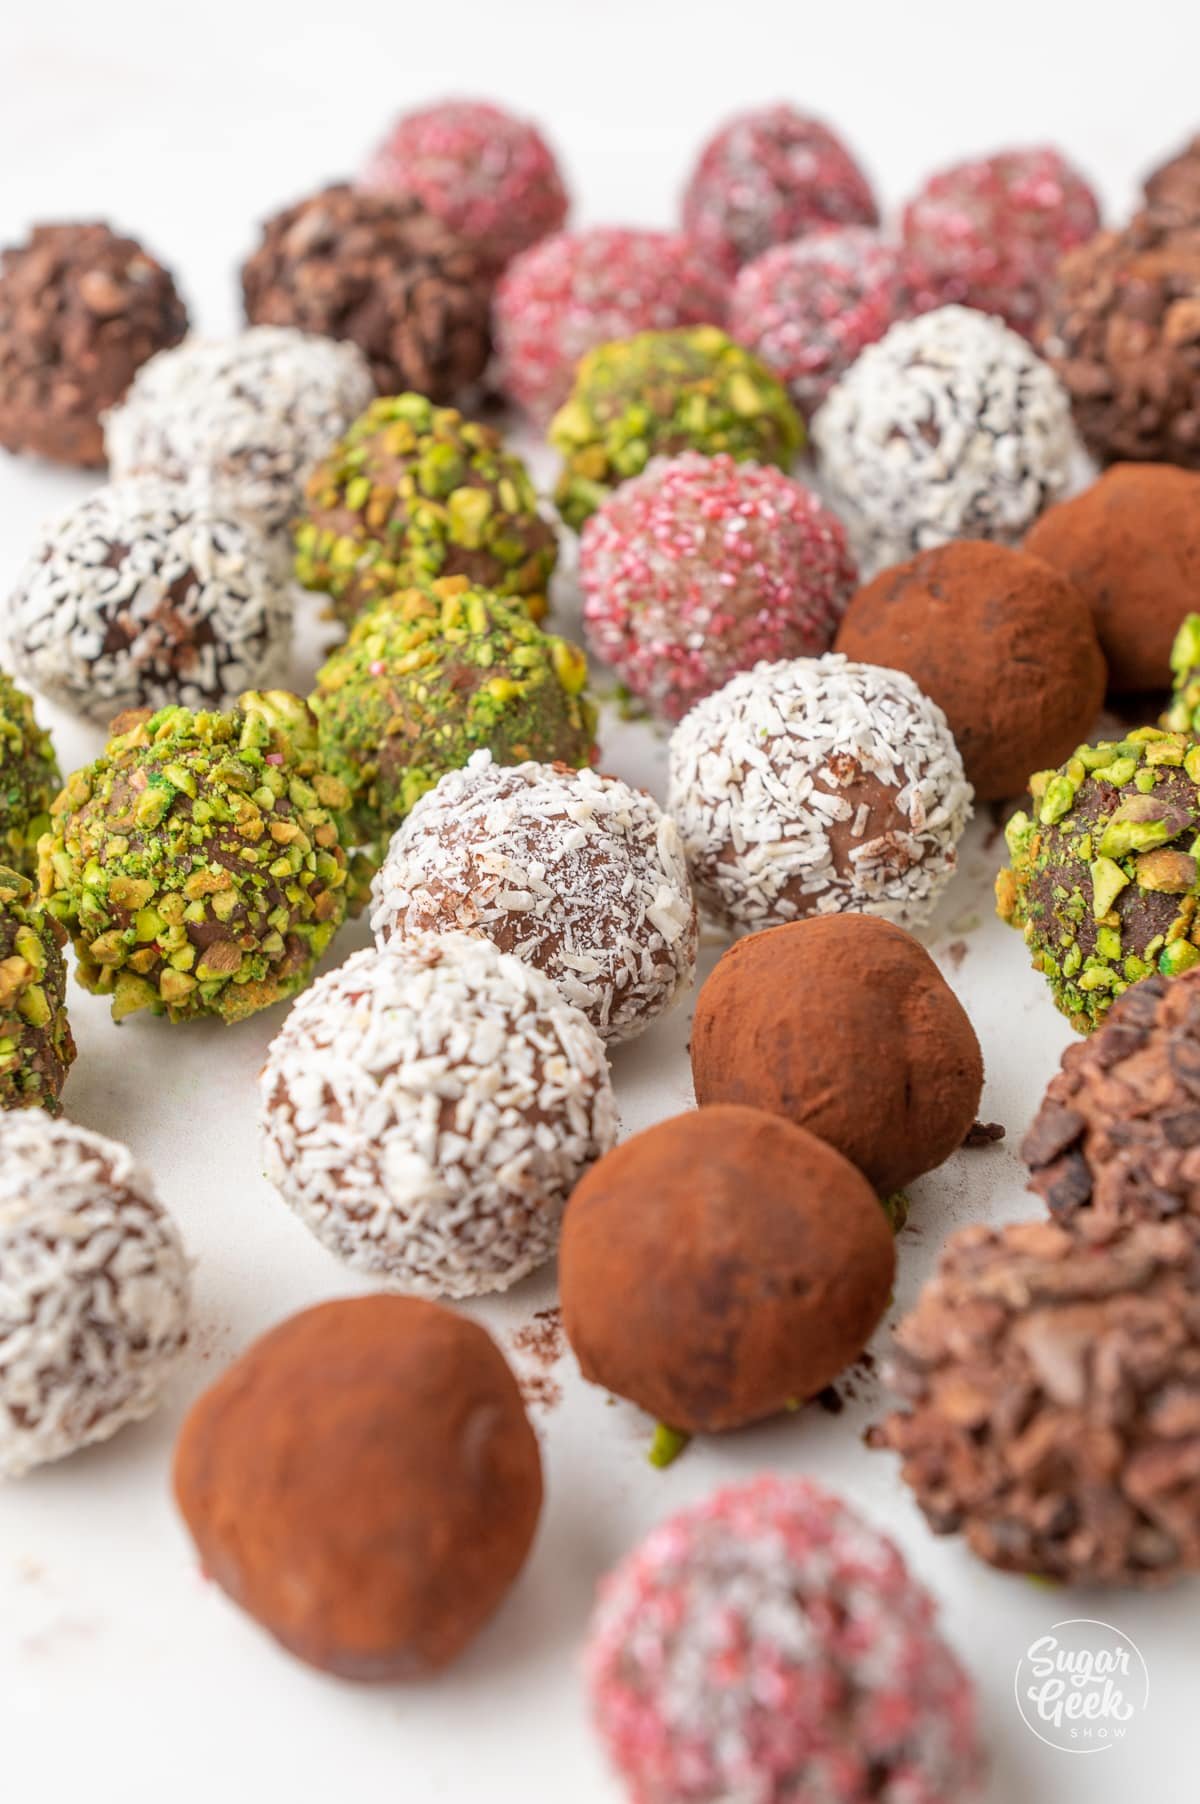 chocolate truffles covered in various toppings on a sheet tray